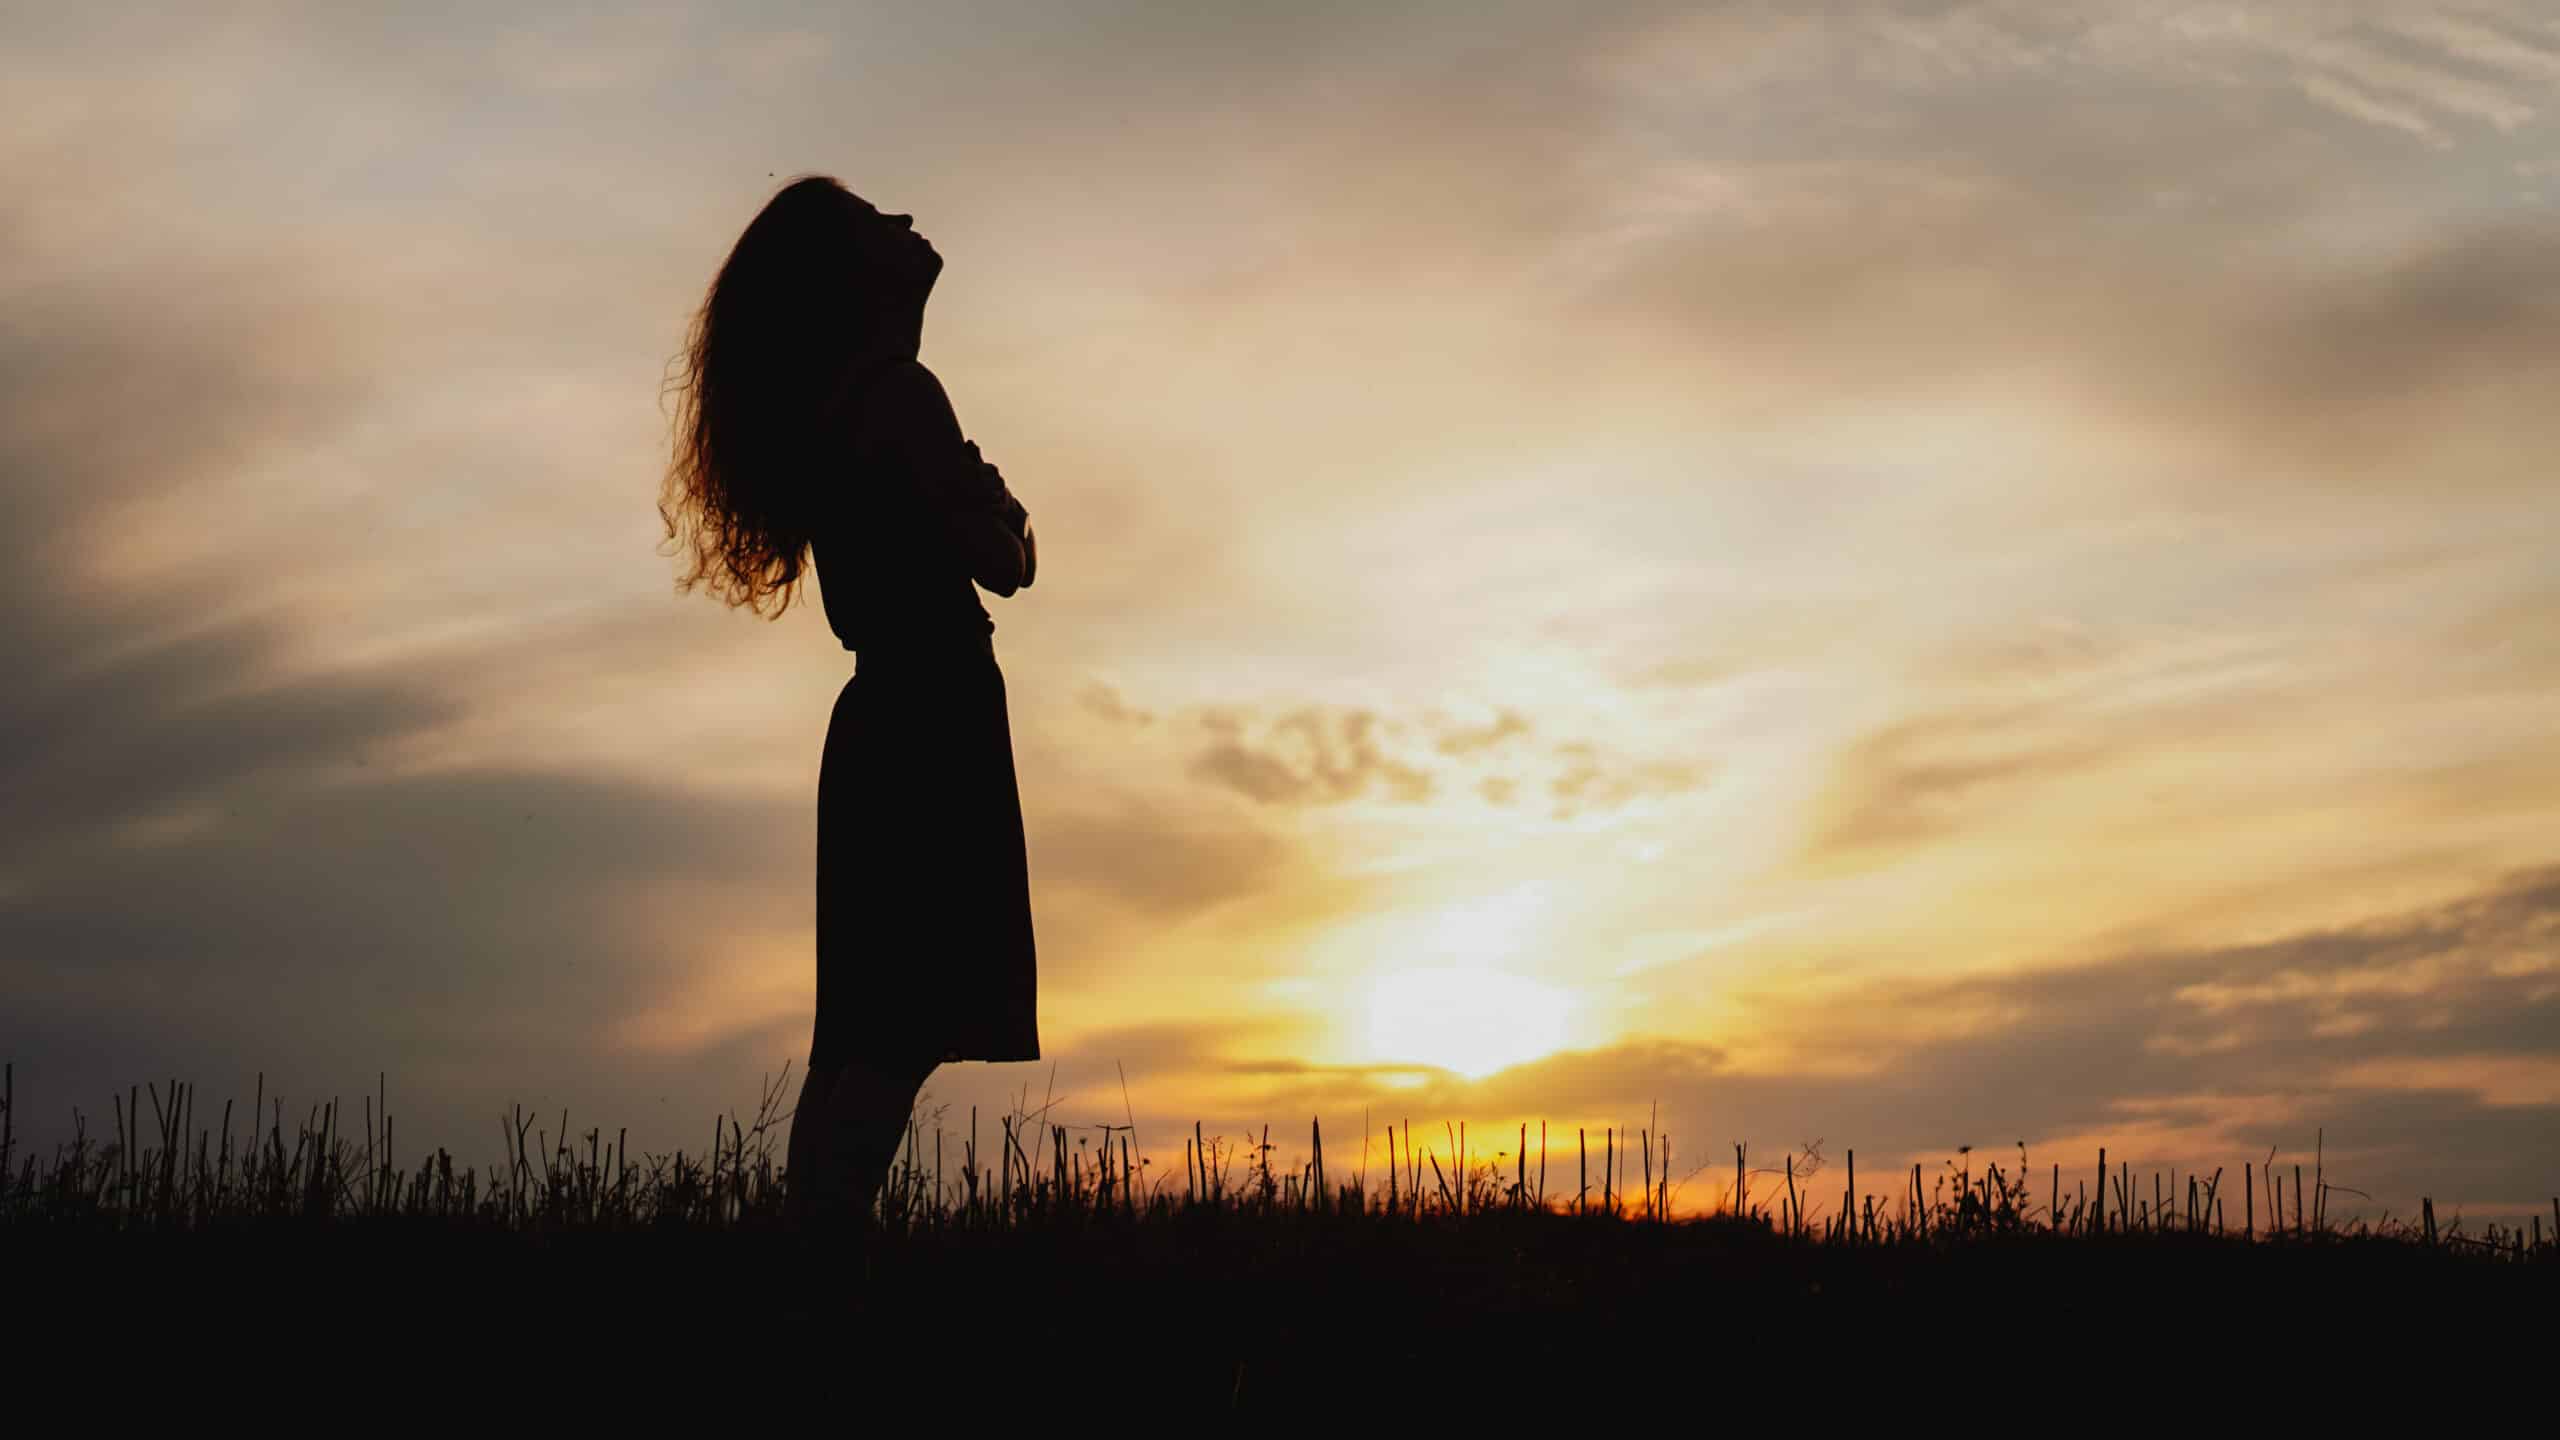 Silhouette of a young woman standing in dry grass field on sunset